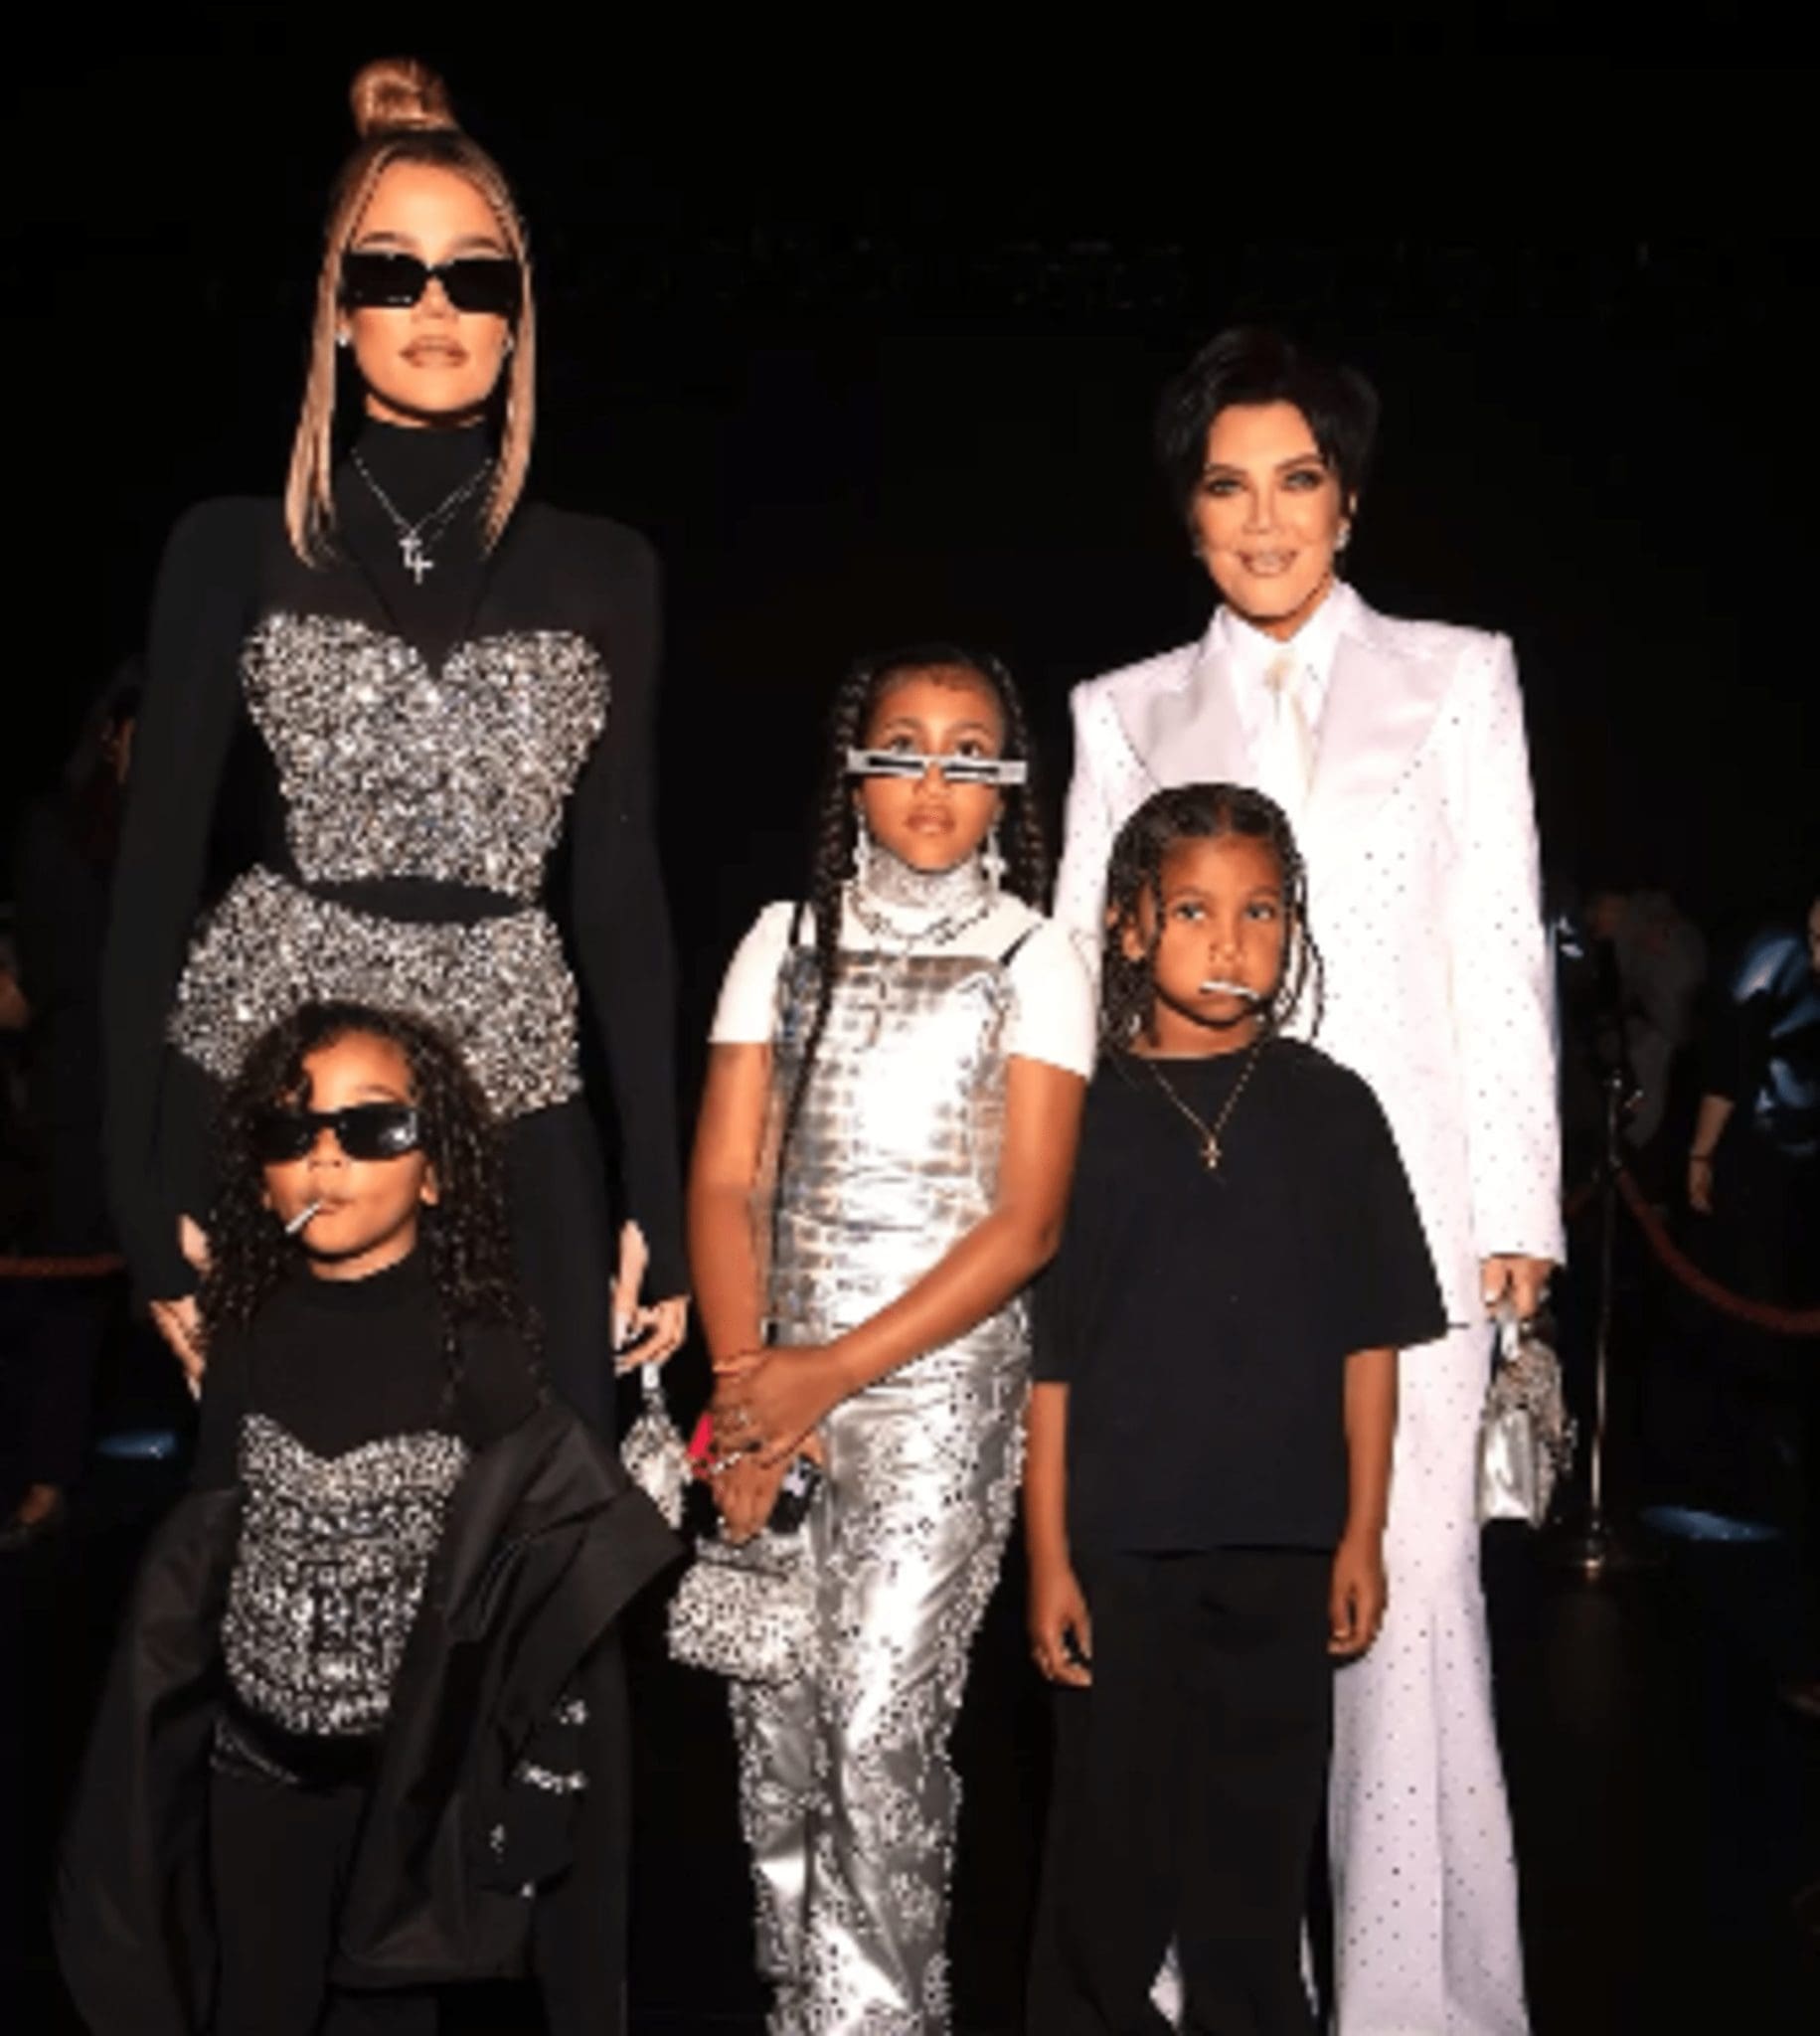 Kim Kardashian brought her family to Milan to see her debut collection with Dolce & Gabbana, titled "Ciao, Kim."